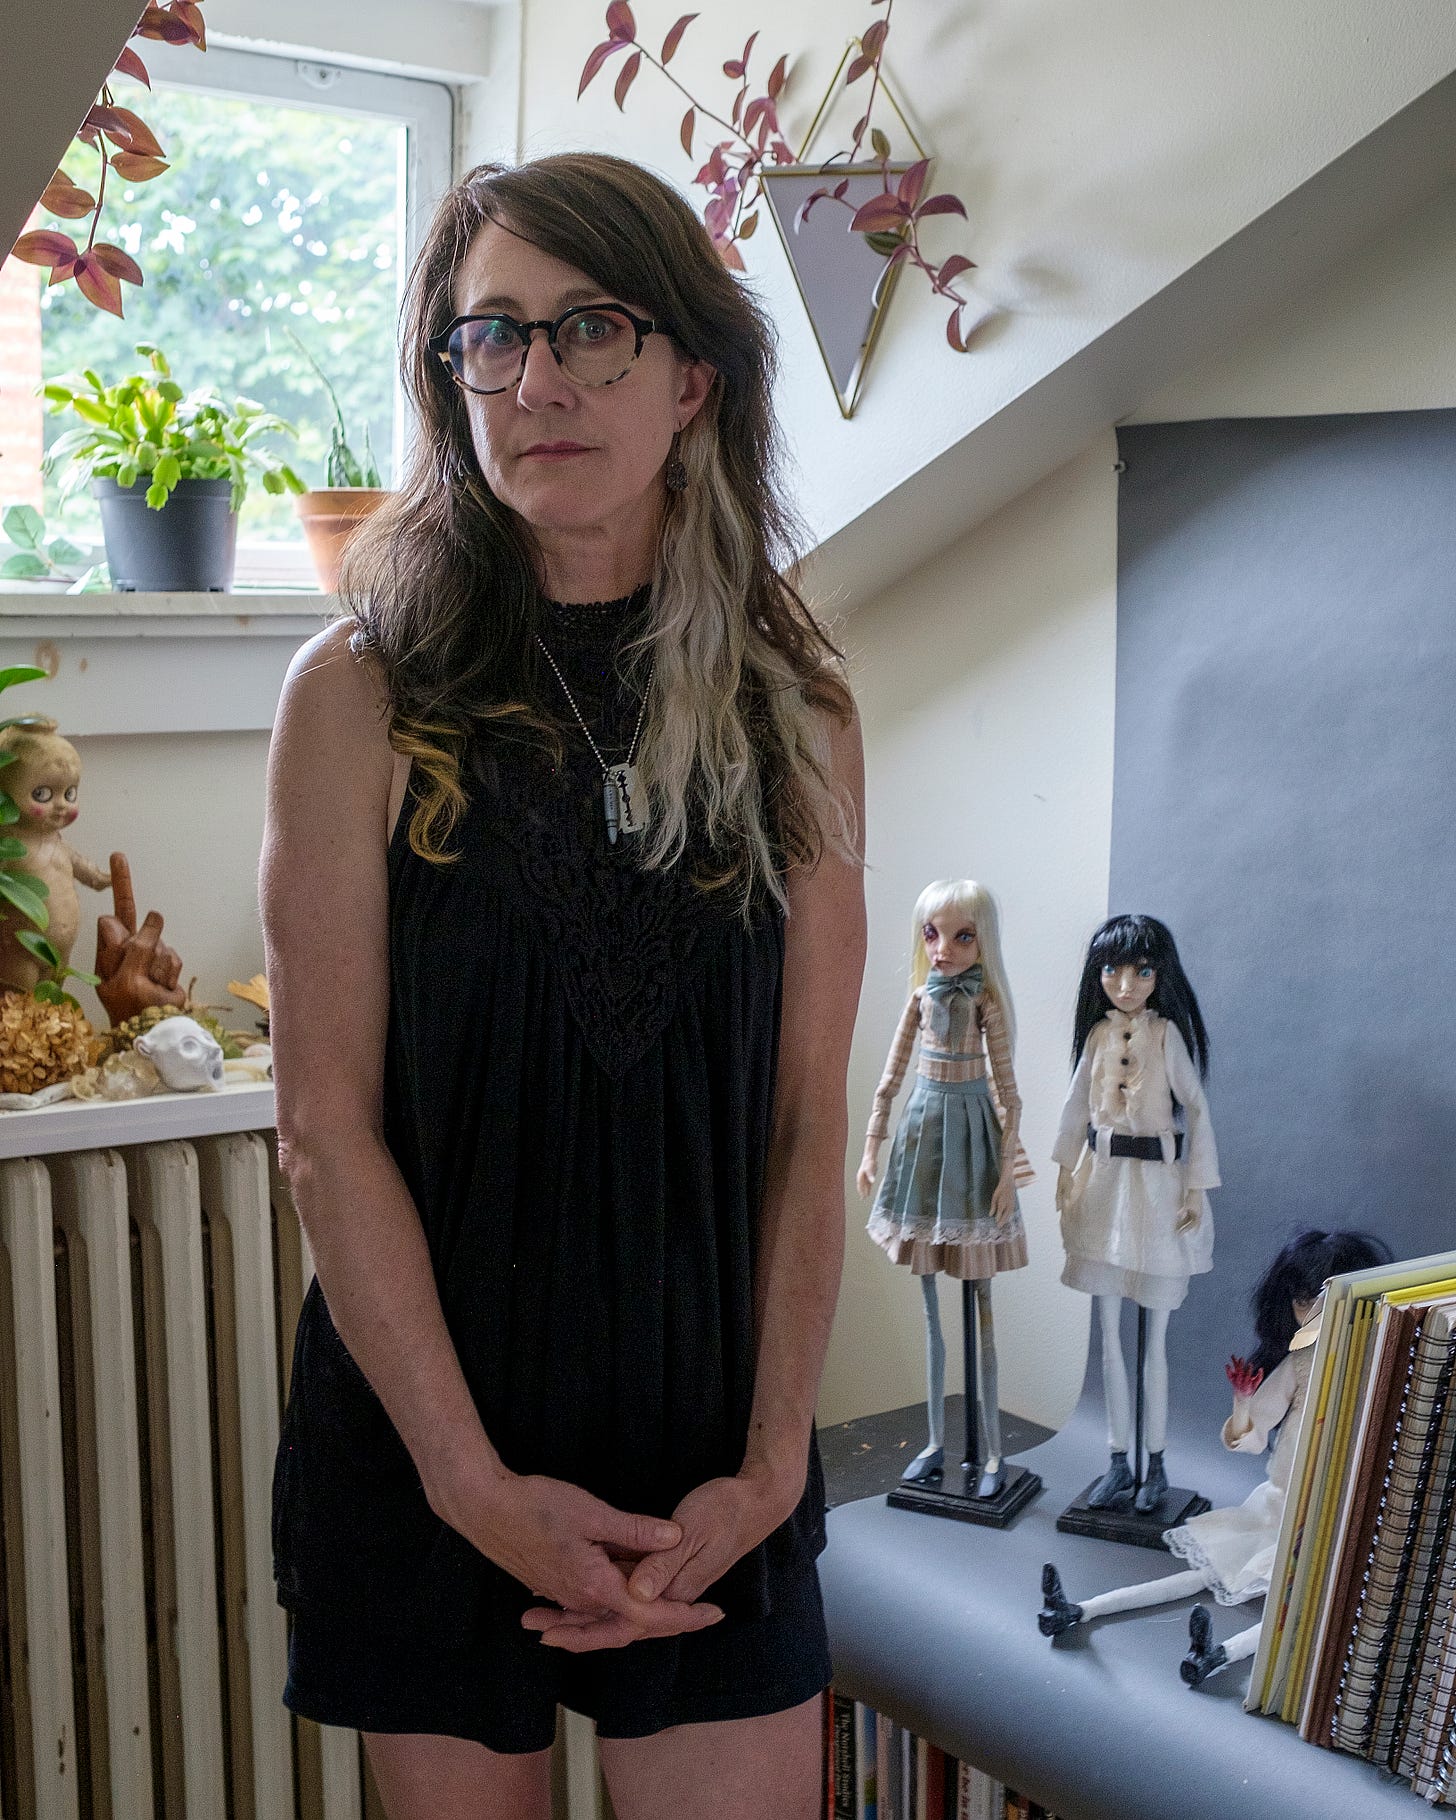 Beth Robinson stands in front of a window with two strange dolls at her side. One doll has blond hair and the other black hair.